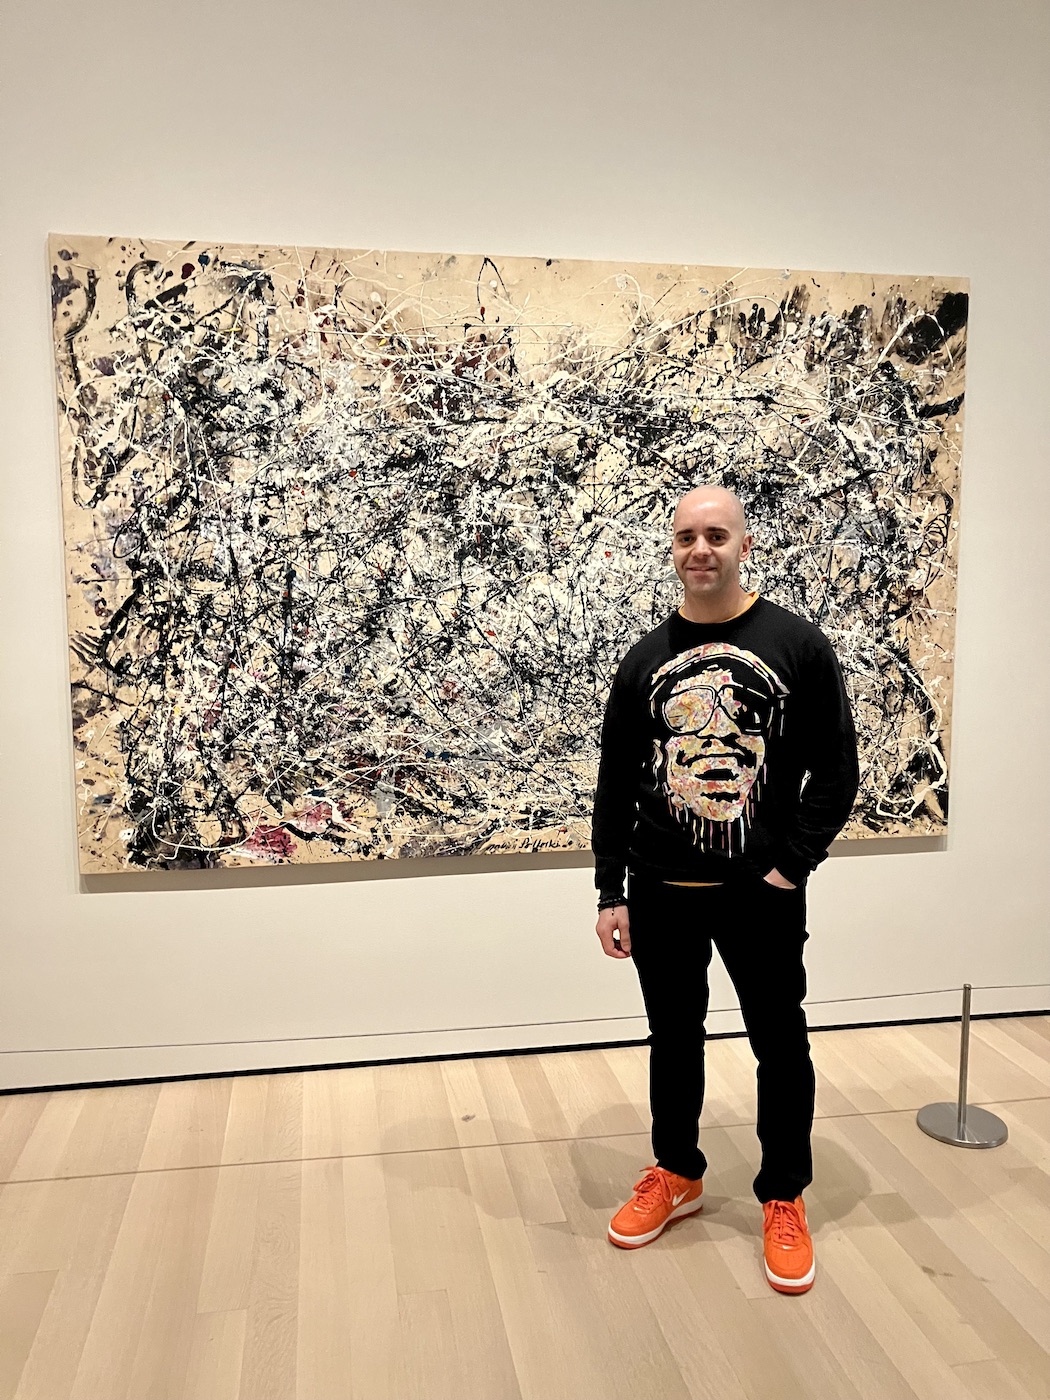 A Jackson Pollock action painting at MoMA, Museum of Modern Art, New York | photo By Kerwin